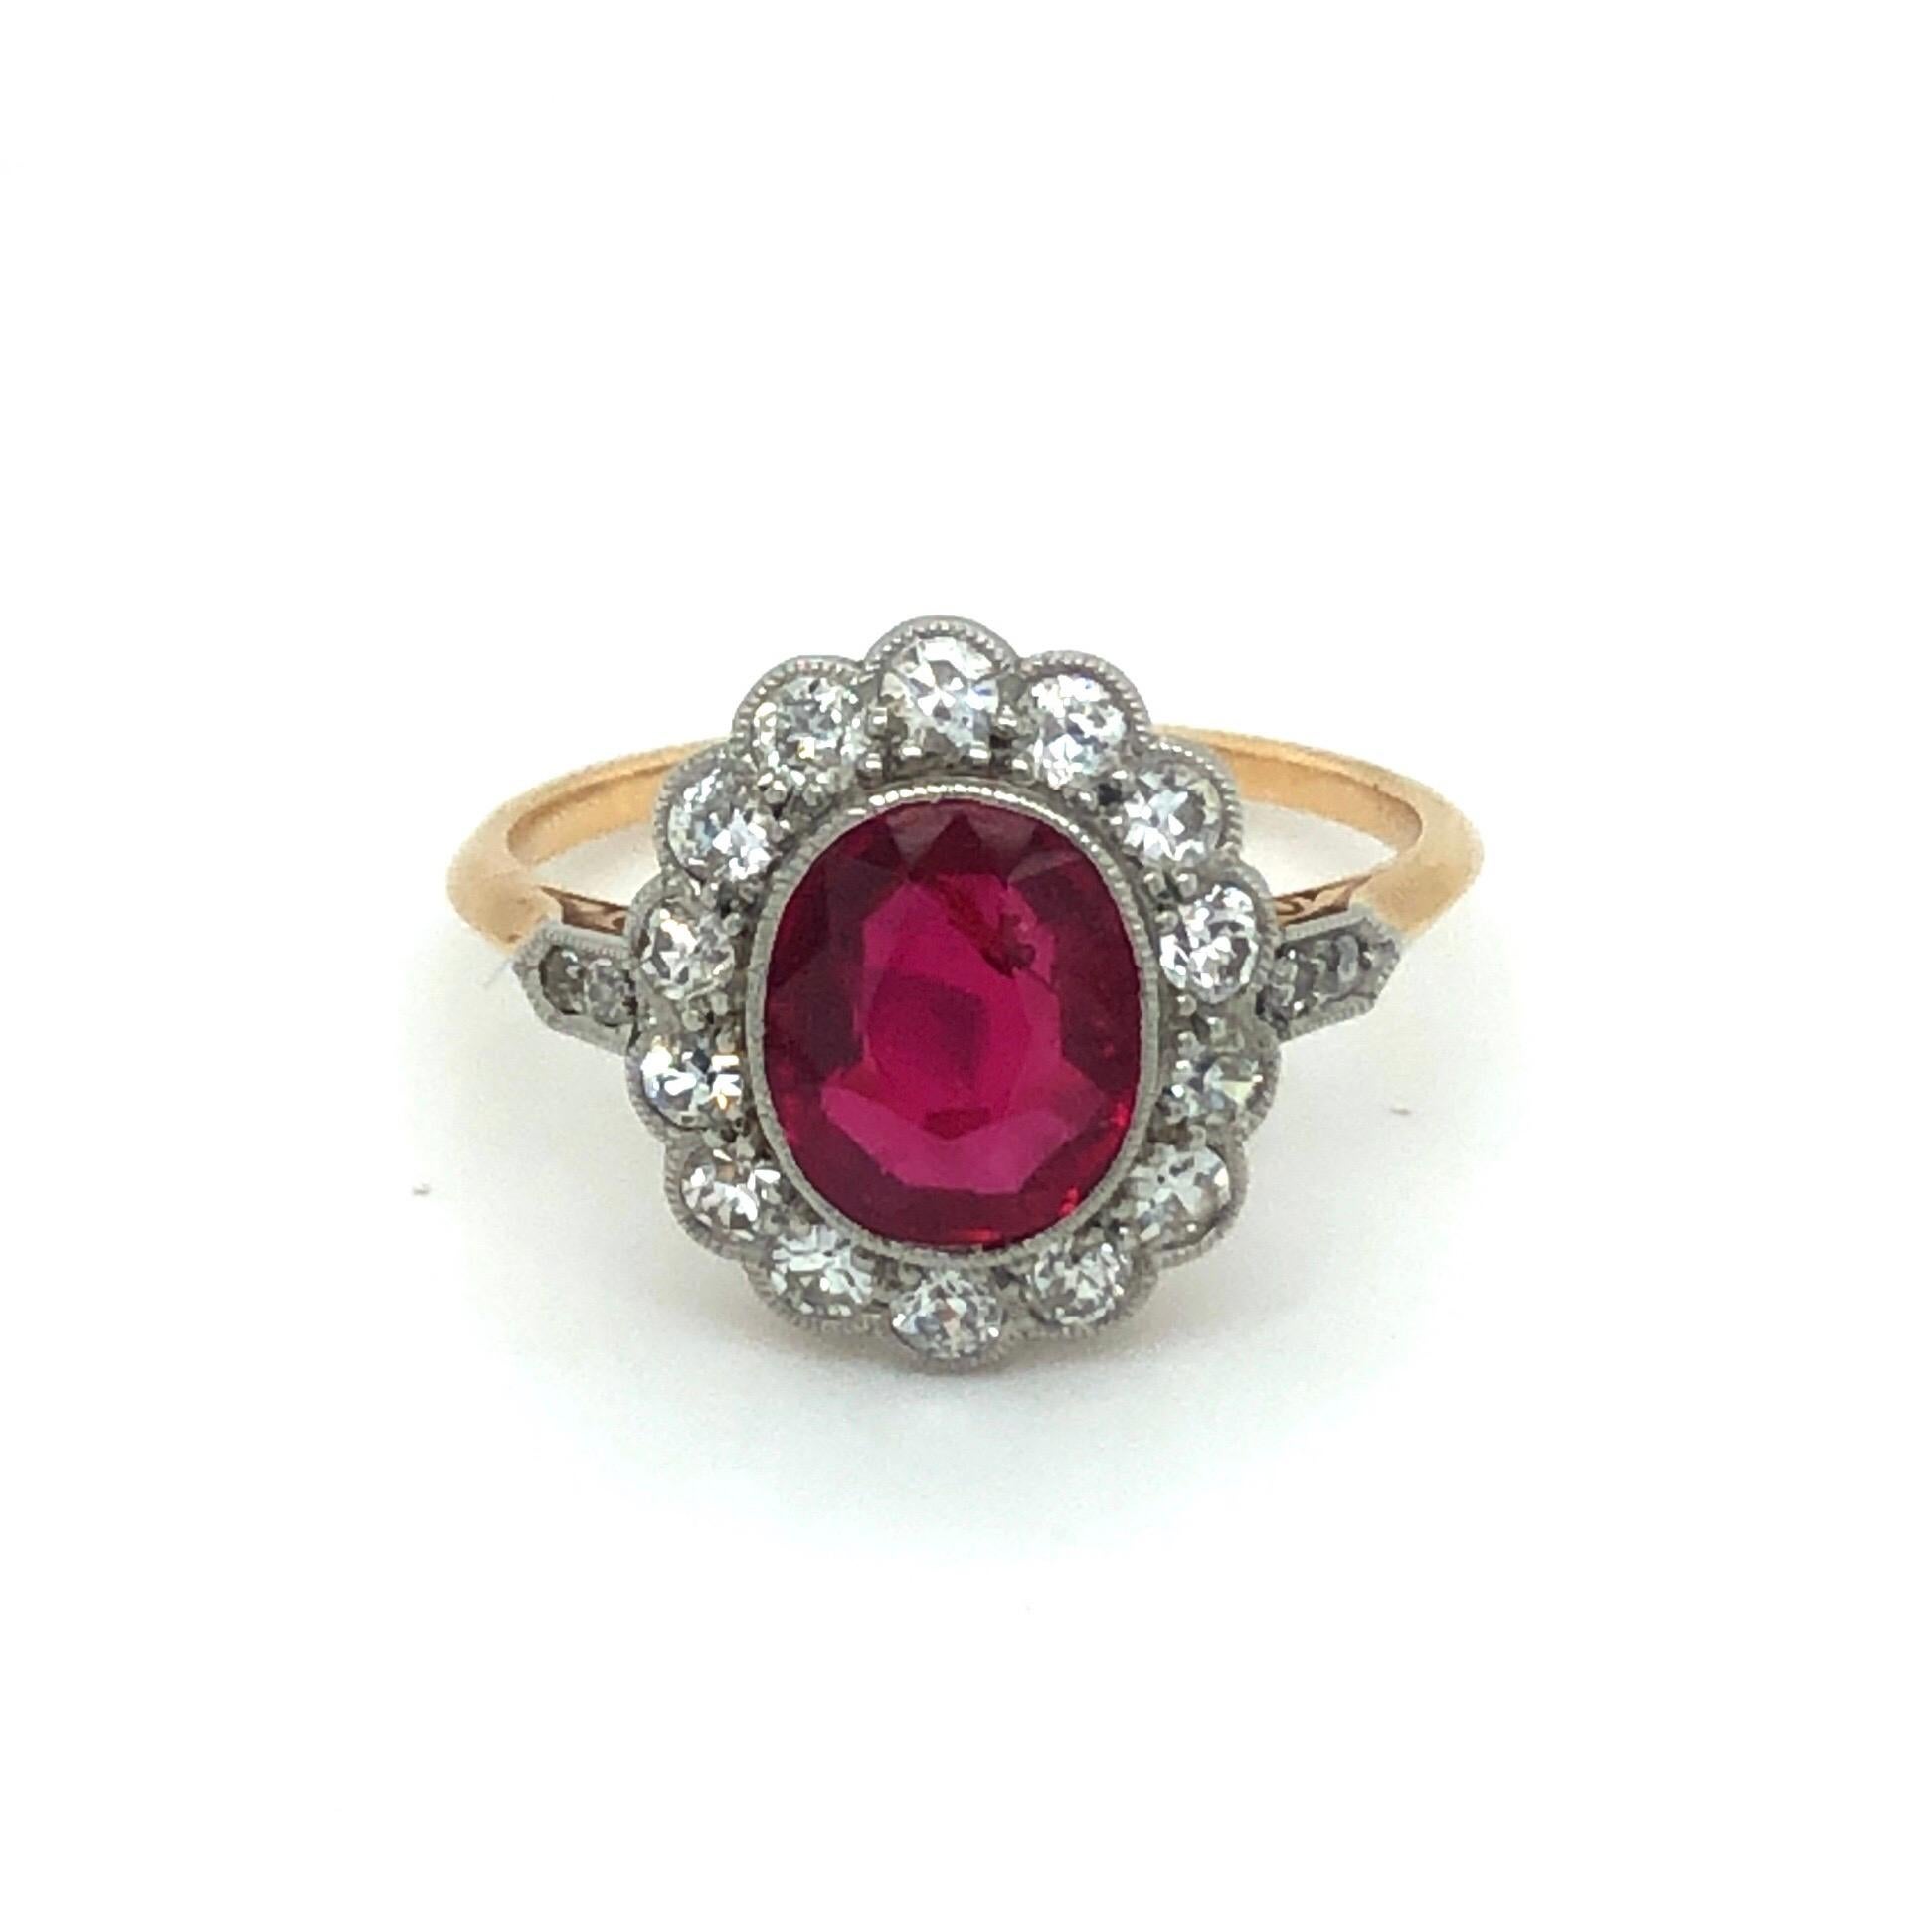 Burma ruby and diamonds rose gold platinum ring, circa 1910.
Adorable Belle Epoque ring crafted in 14 karat rose gold and platinum and set with an oval, unheated Burmese ruby of circa 1.2 carats surrounded by 18 round old-cut and single-cut diamonds